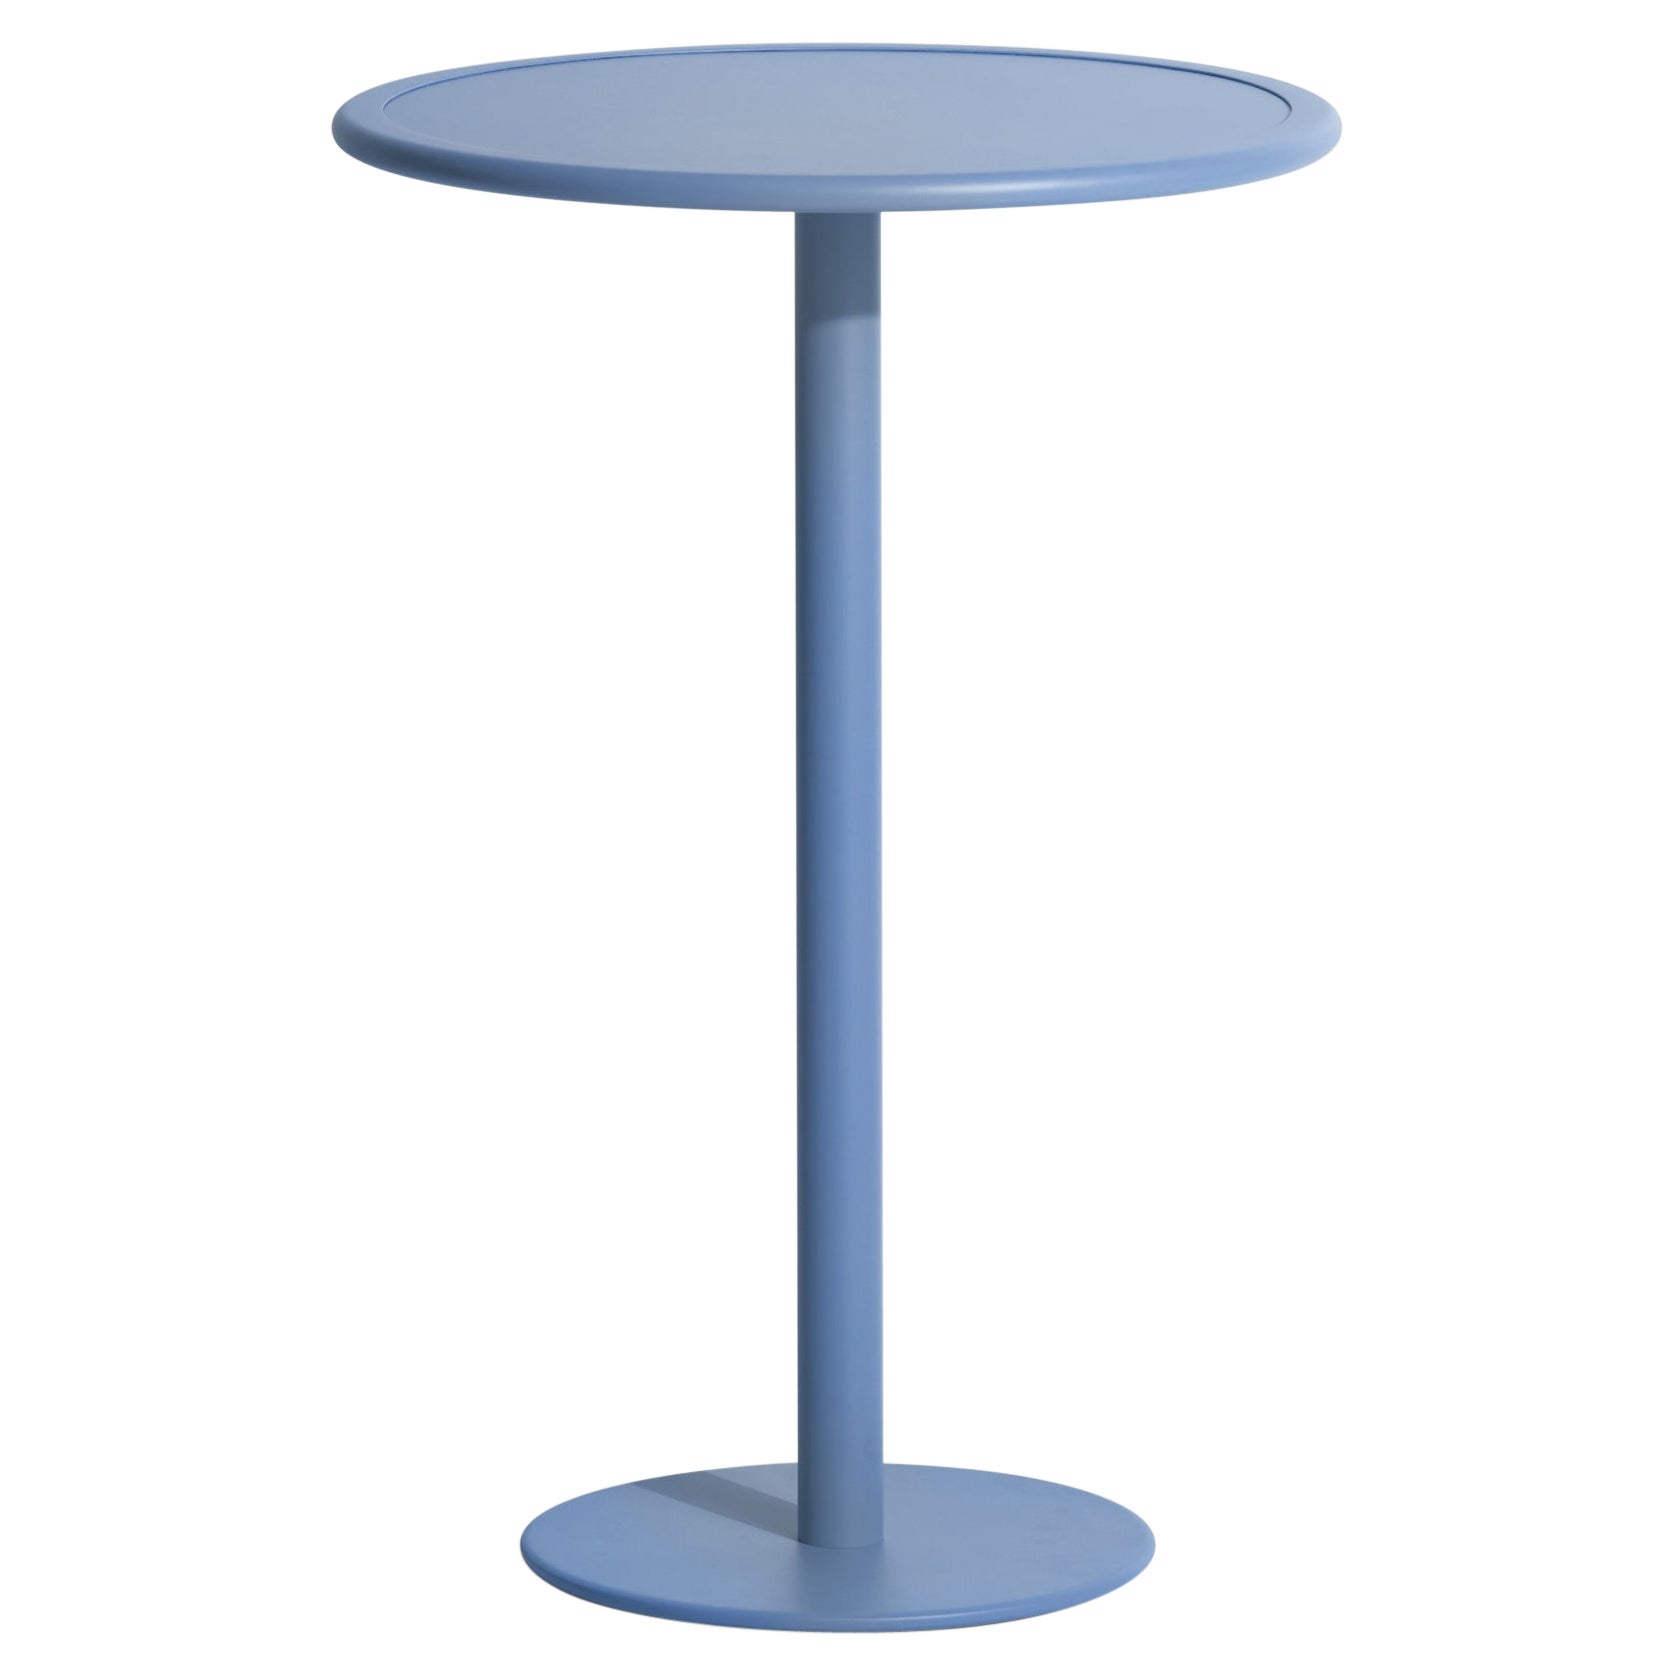 Petite Friture Week-End Round High Table in Azure Blue Aluminium, 2017 For Sale